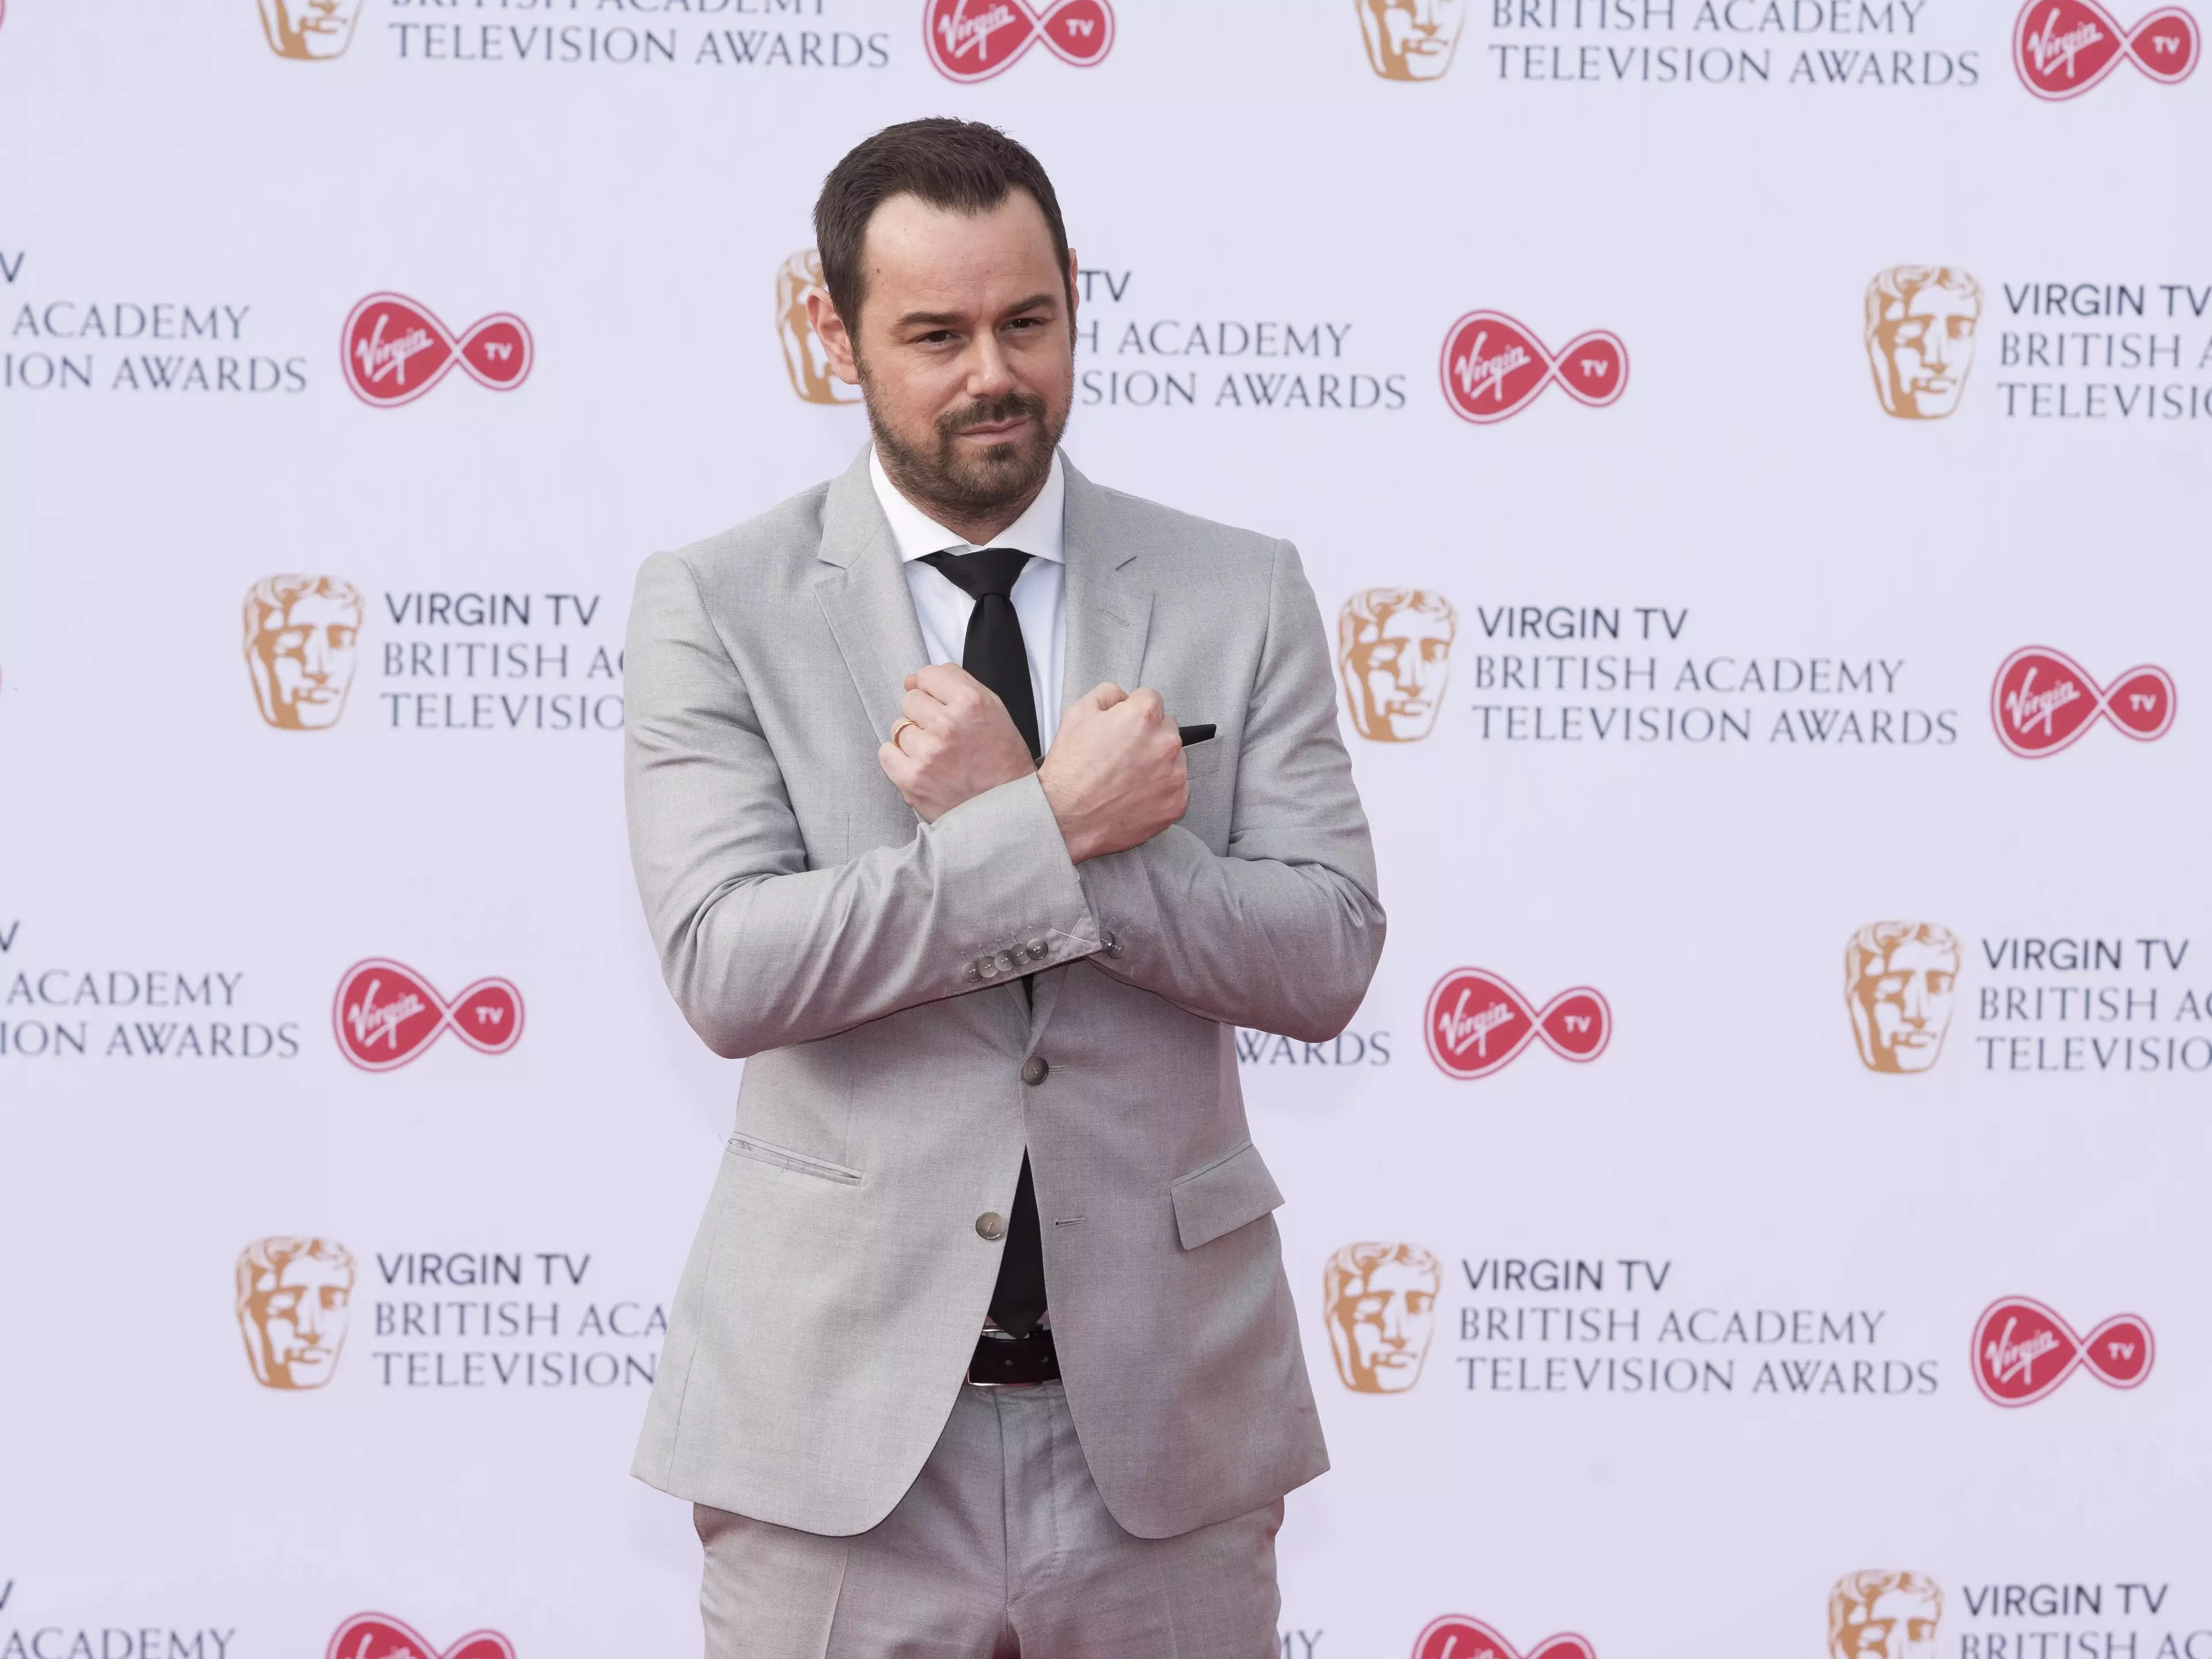 Danny Dyer attacked Boris Johnson and Nigel Farage on Brexit.